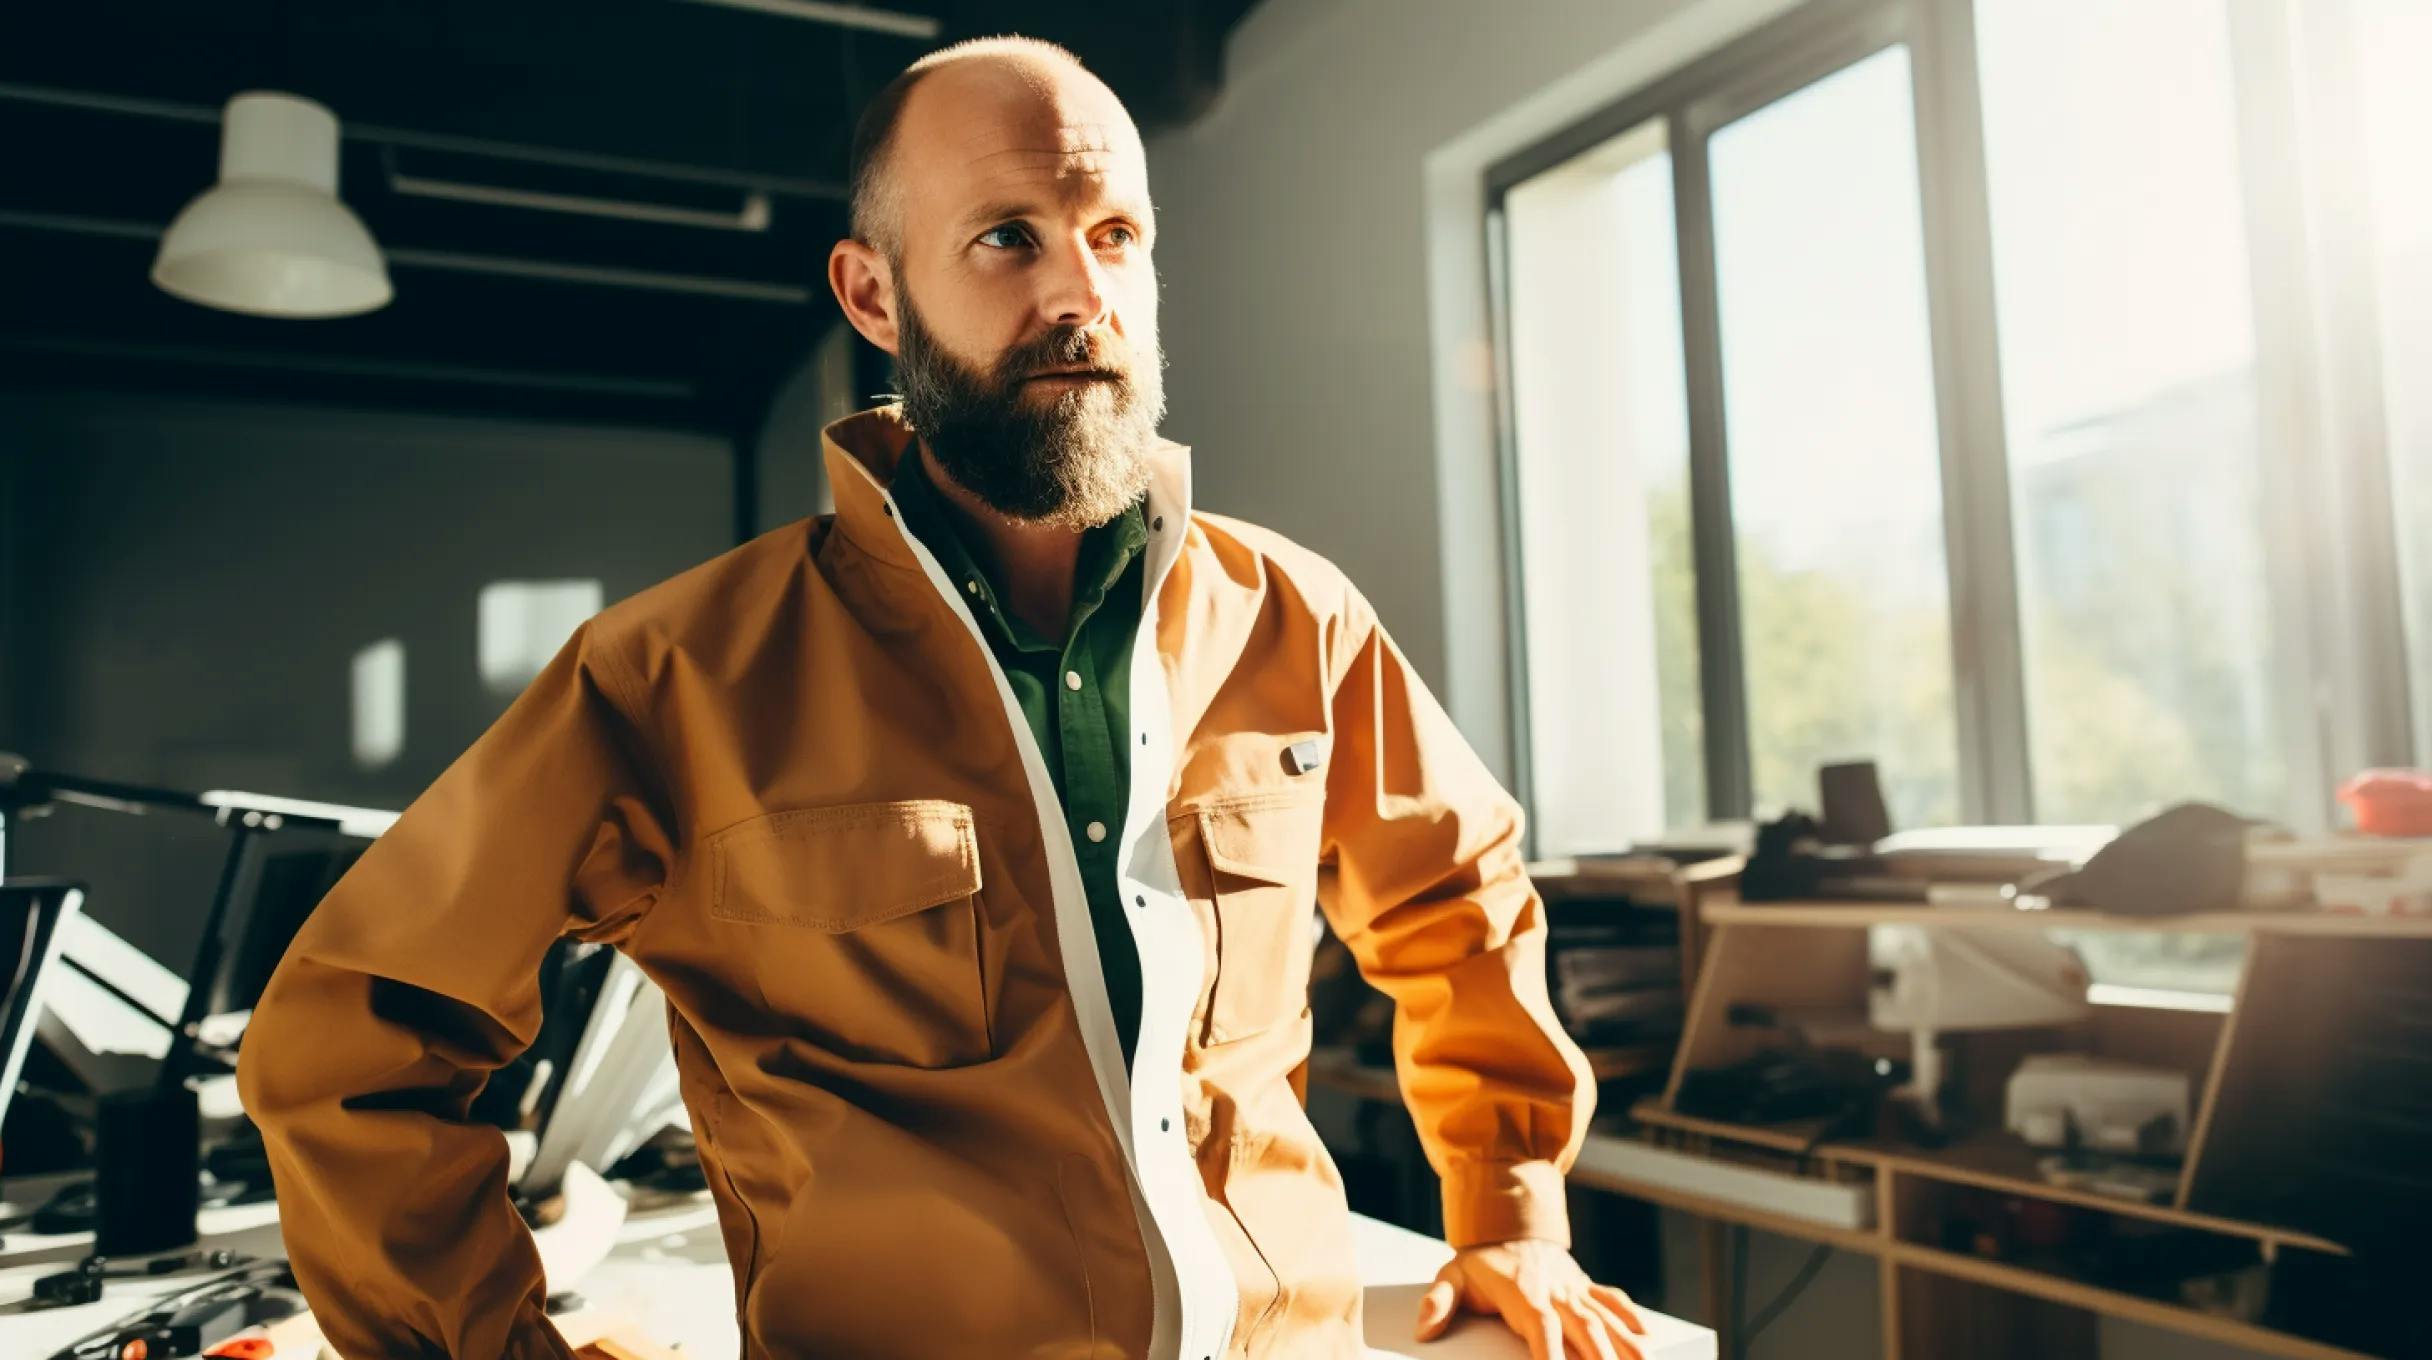 Man in orange jacket sitting in an workshop with tools in the background